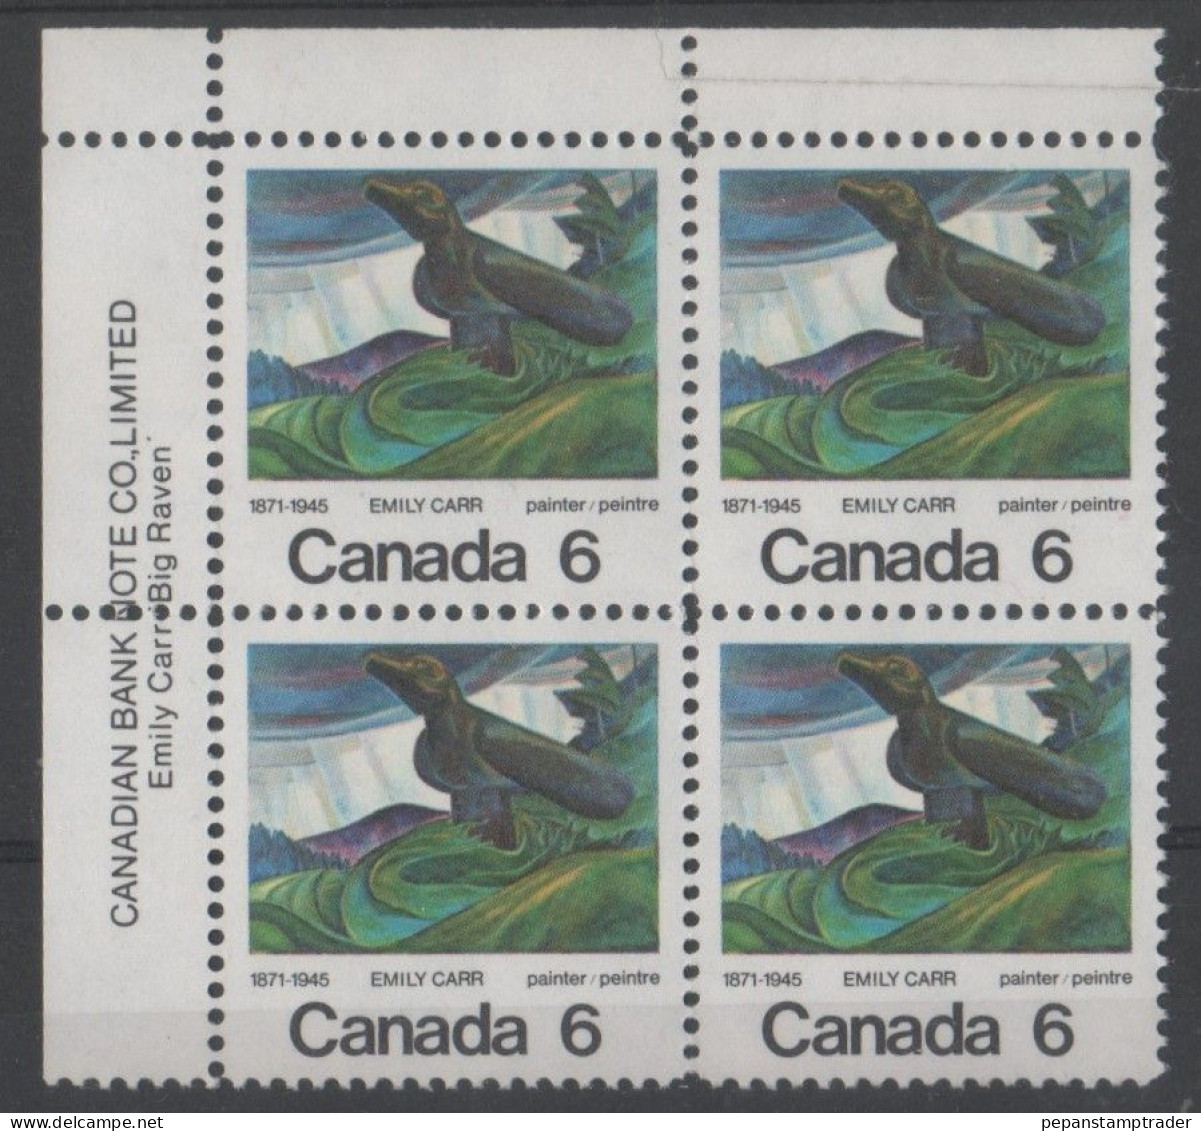 Canada - #532 - MNH PB - Num. Planches & Inscriptions Marge